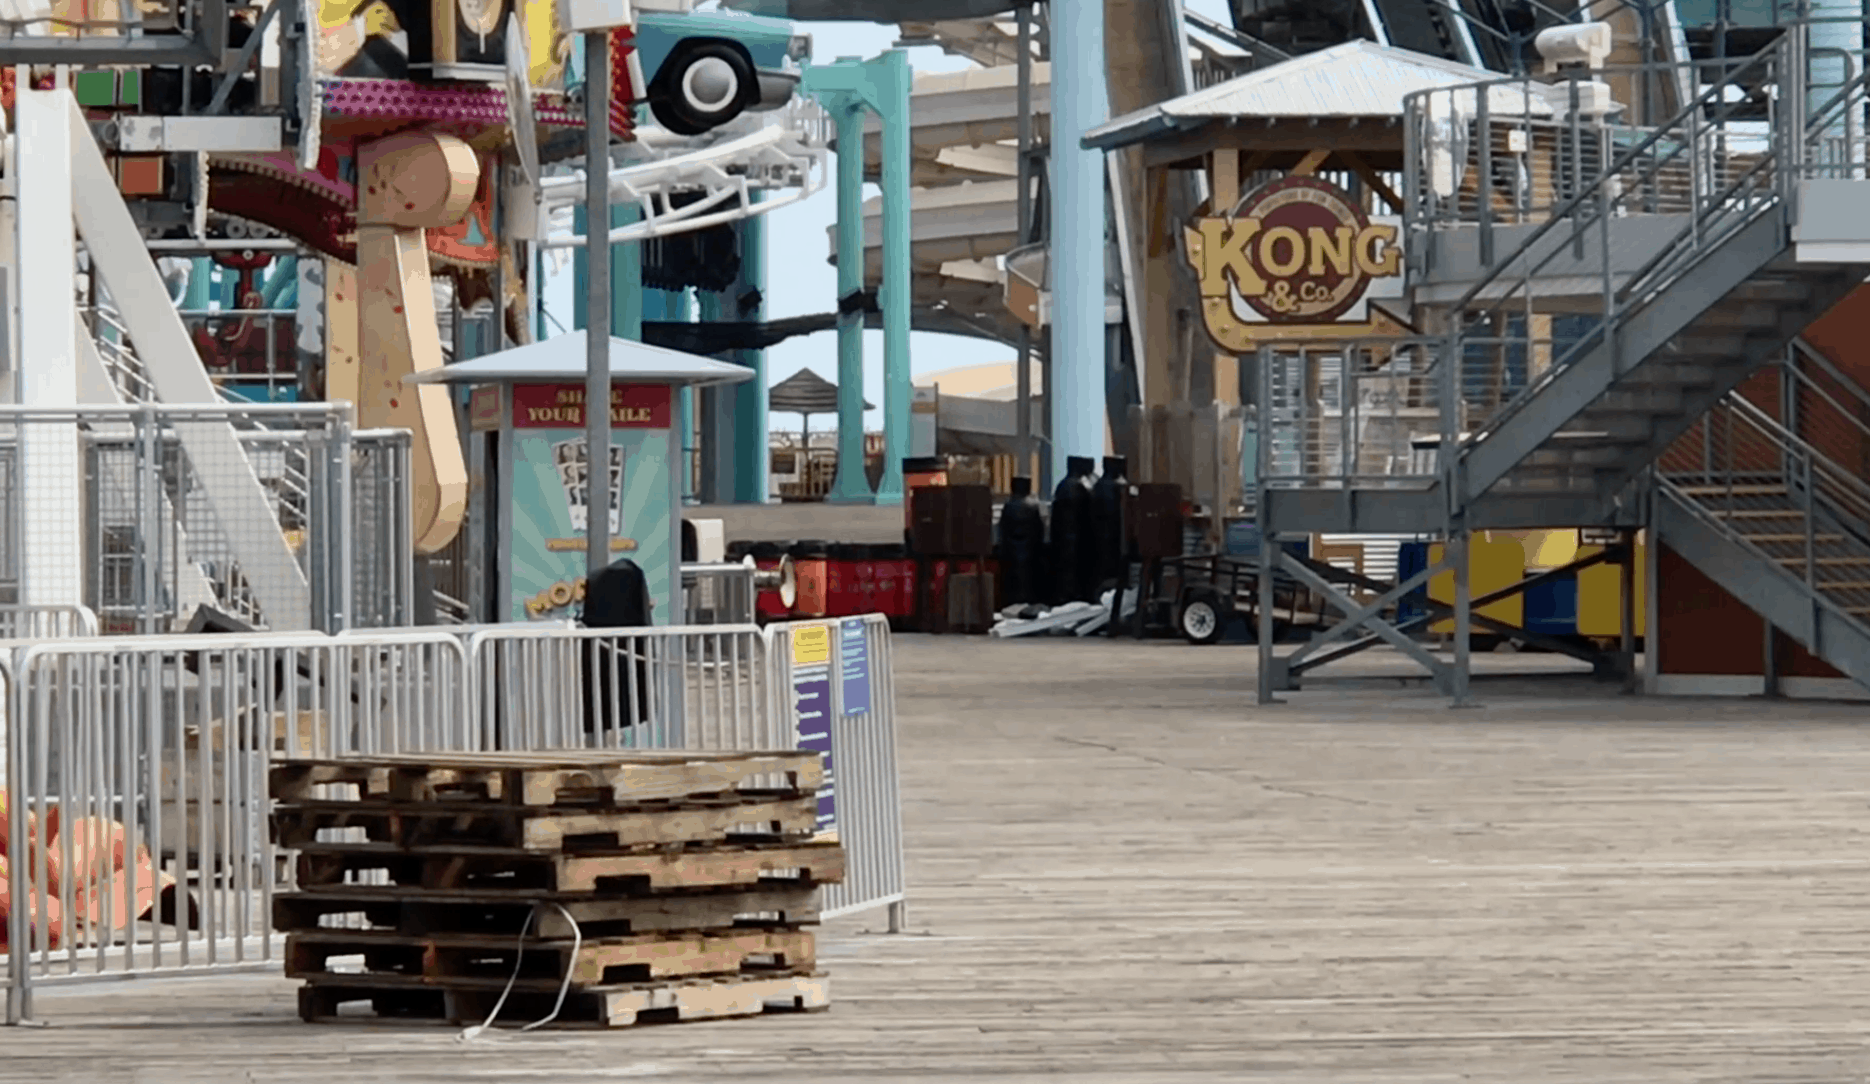 Surfside Pier Is Getting Packed Up For Winter